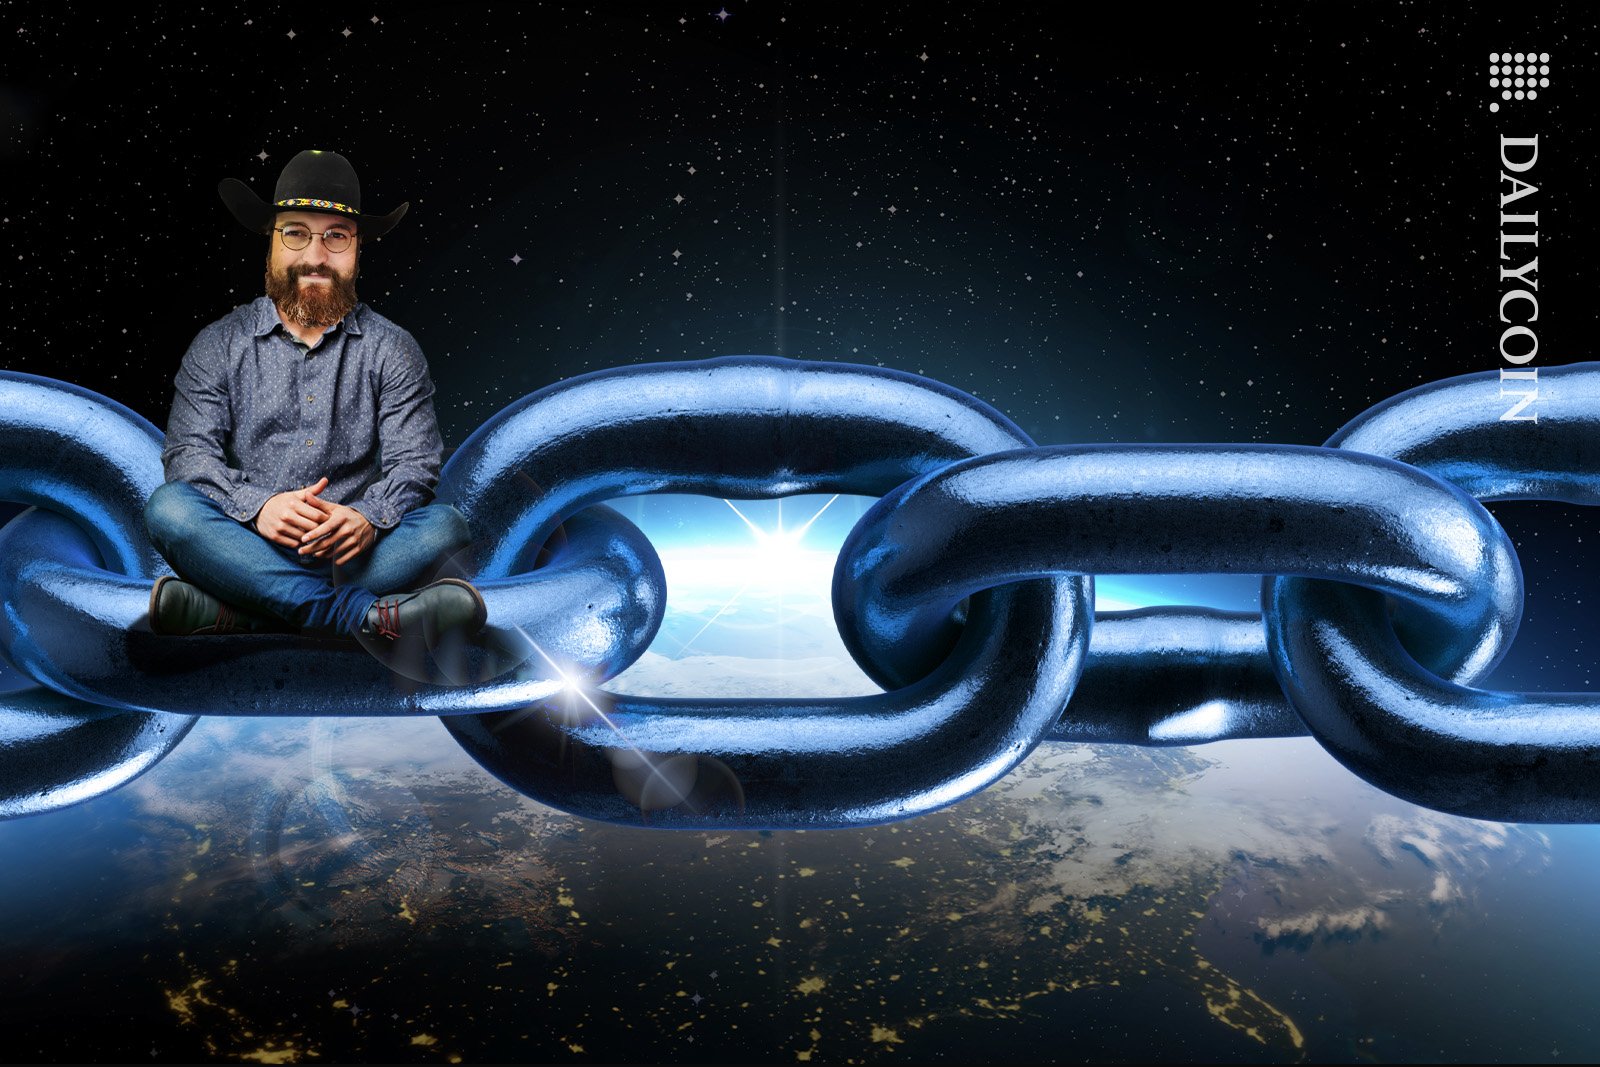 Cardano's Charles Hoskinson sitting on a very thick chain in space.